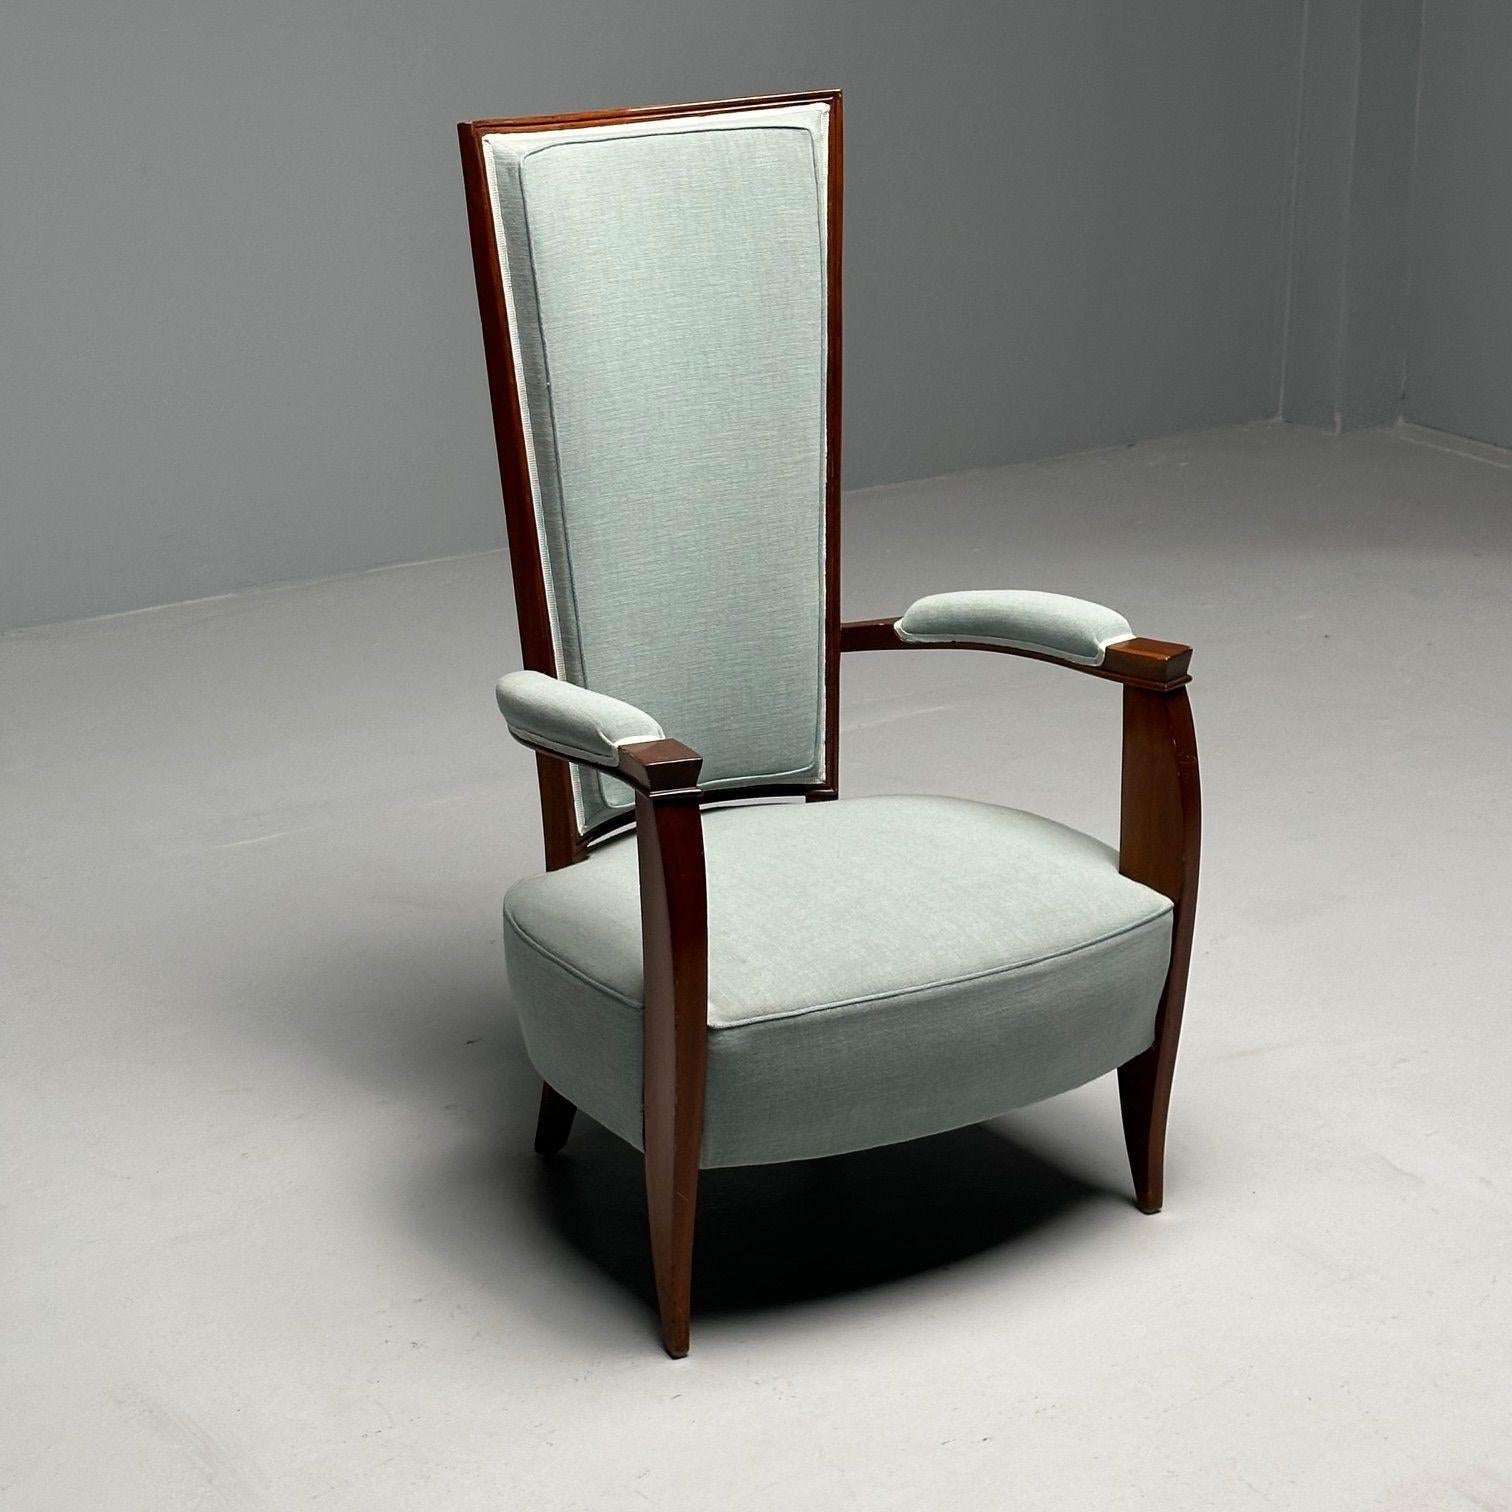 French Art Deco, High-Back Chairs, Mahogany, Turqoise Linen, France, 1970s For Sale 1